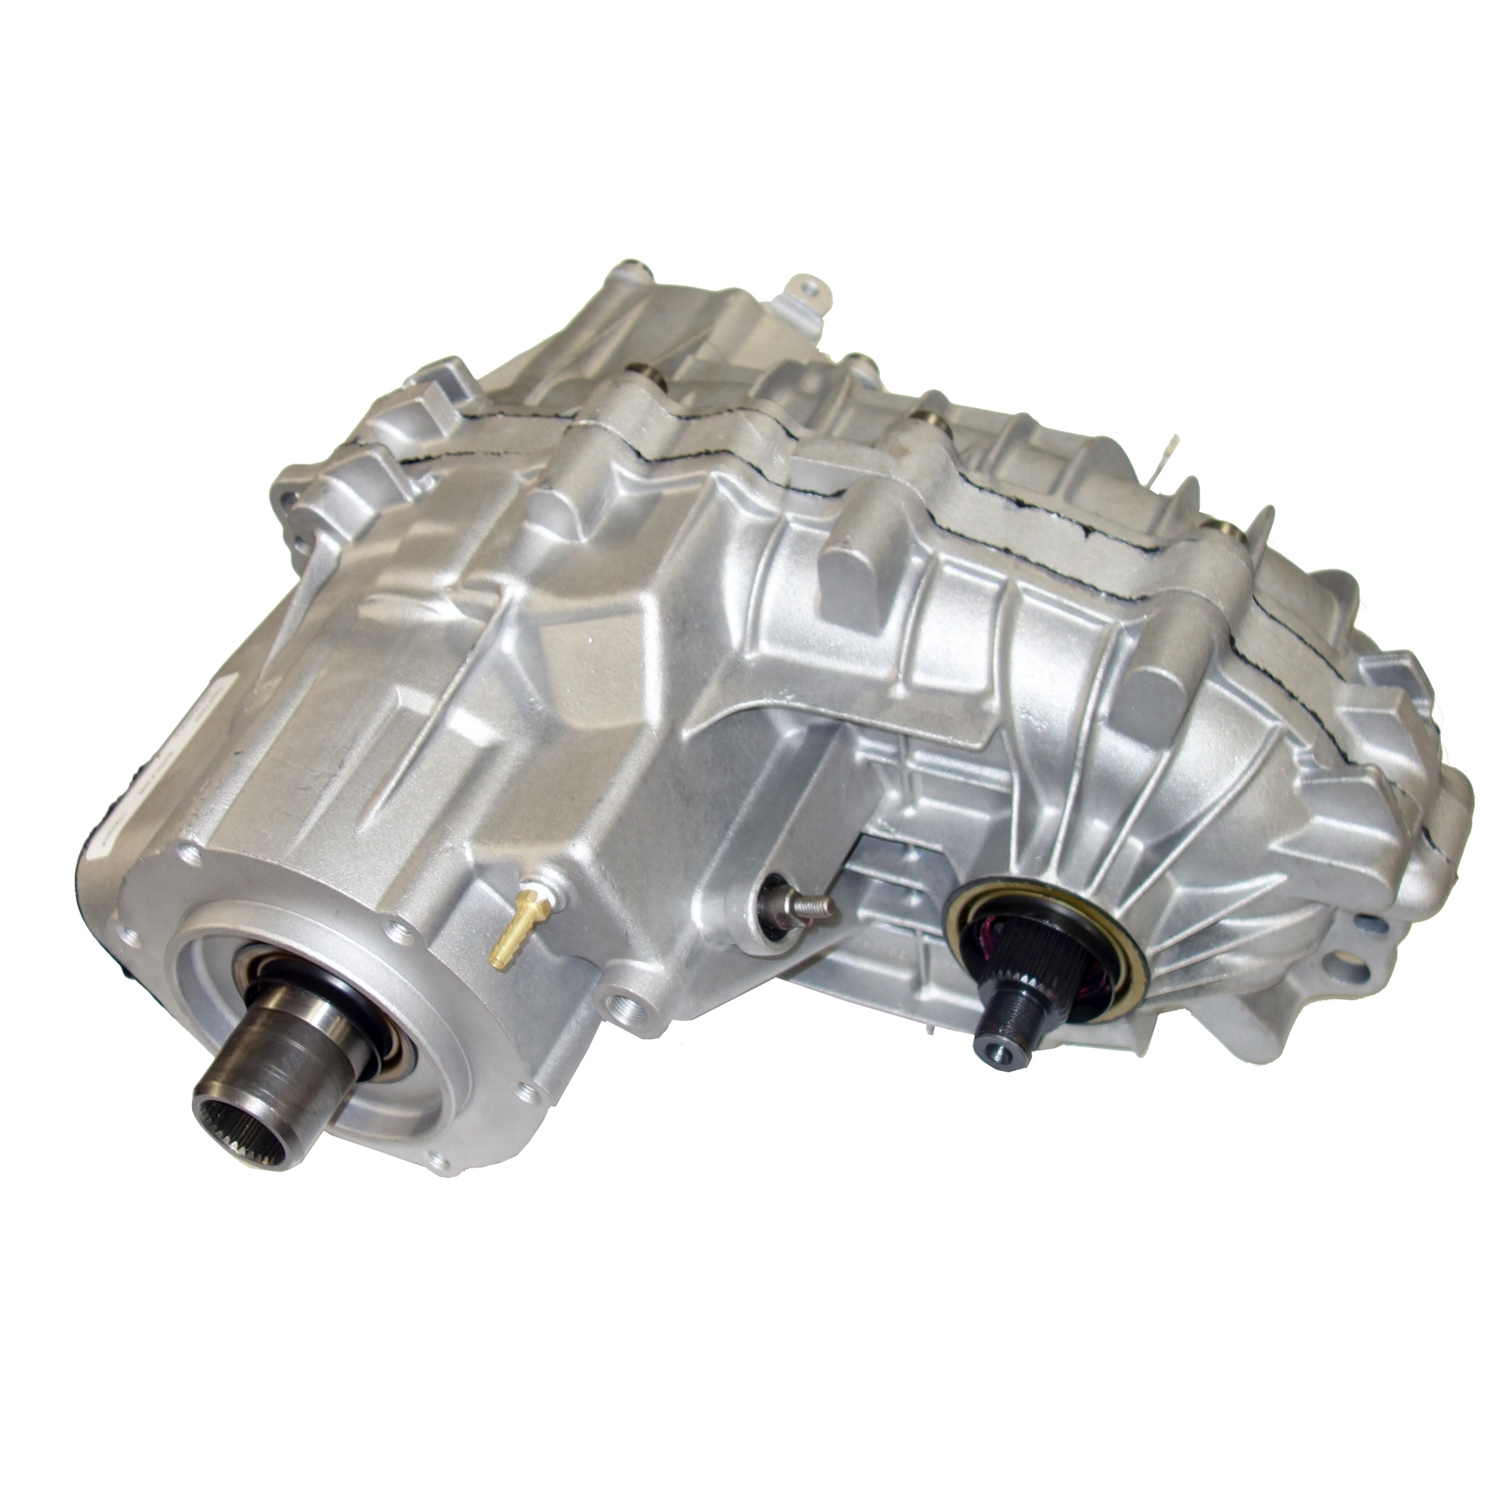 Remanufactured BW4473 Transfer Case for GM 03-10 Express 1500/2500